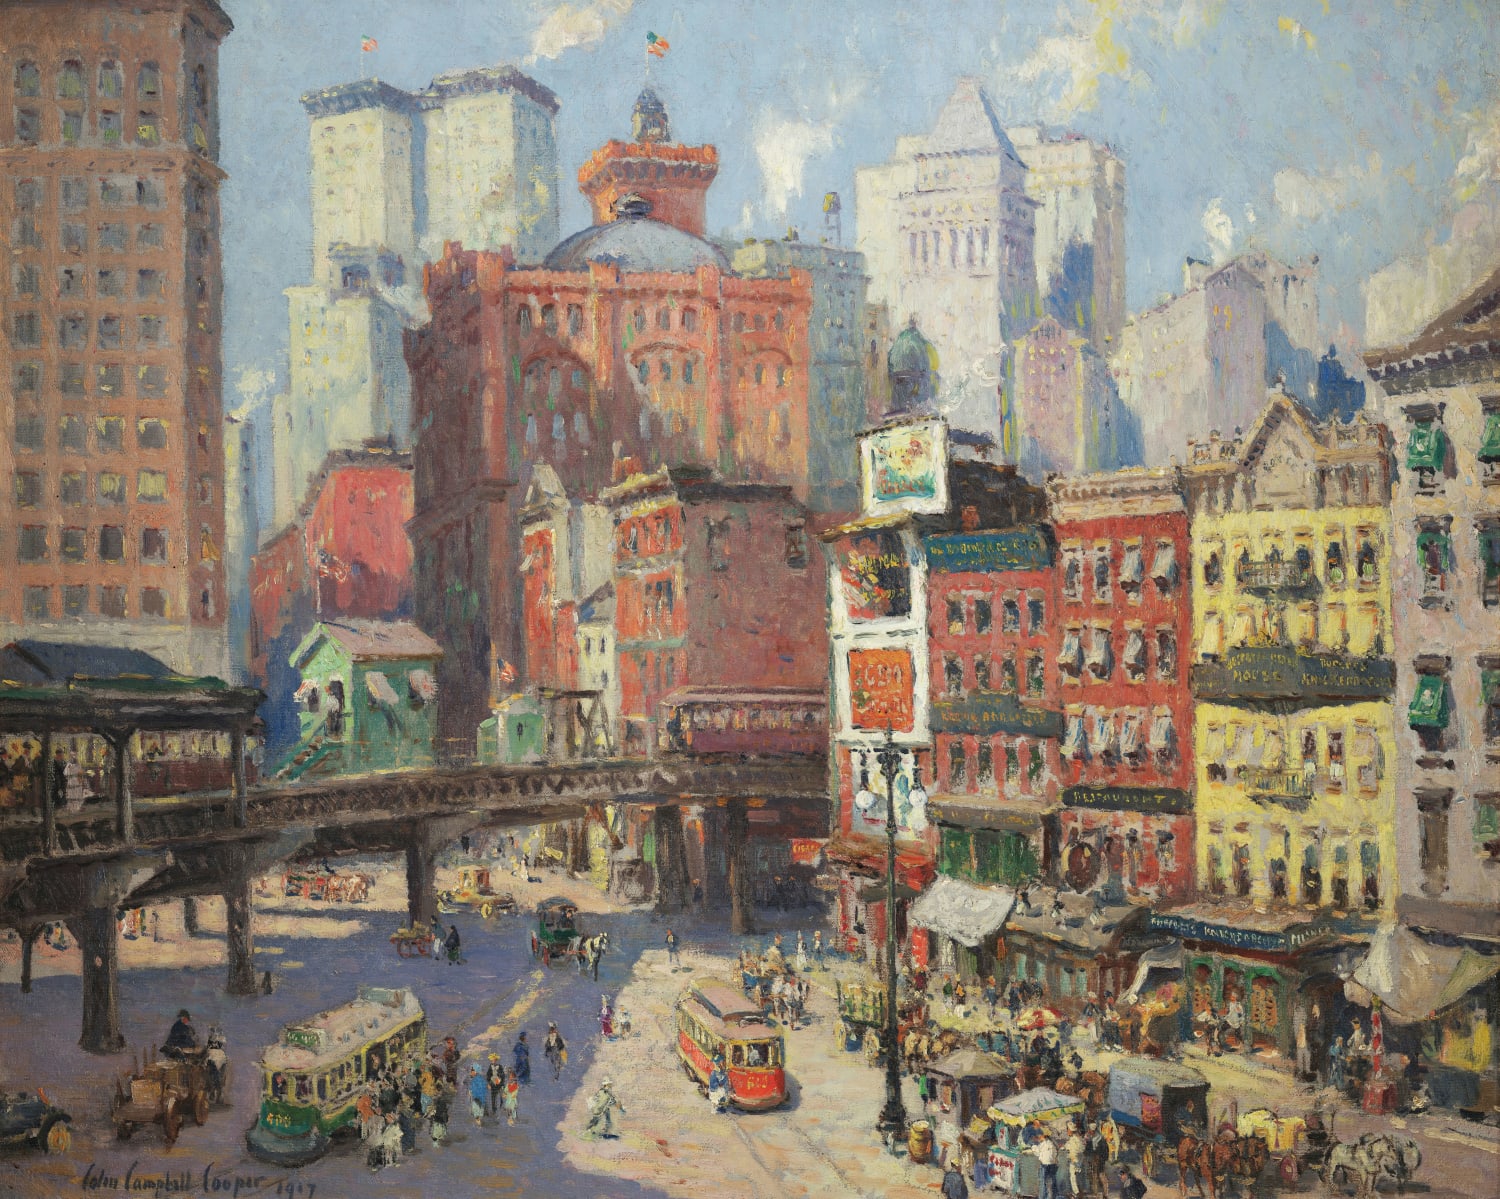 South Ferry, New York, Colin Campbell Cooper, 1917,